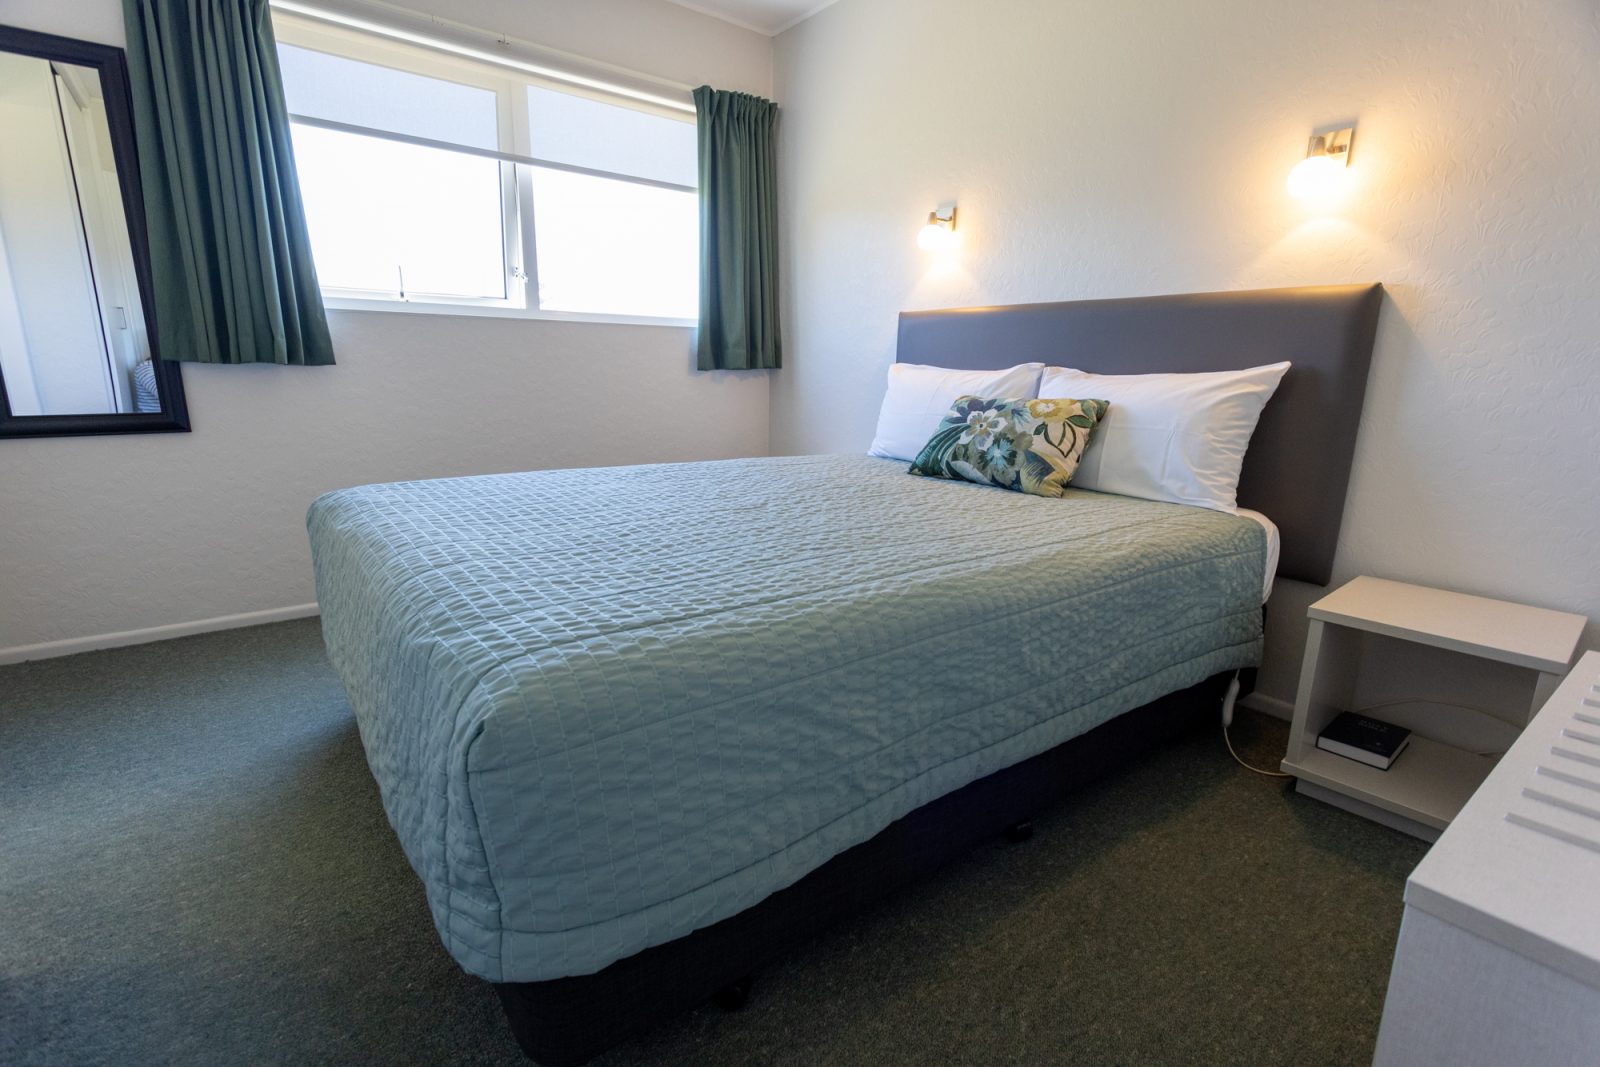 2 Single Beds, Queen Bed, Fully Equipped Kitchen